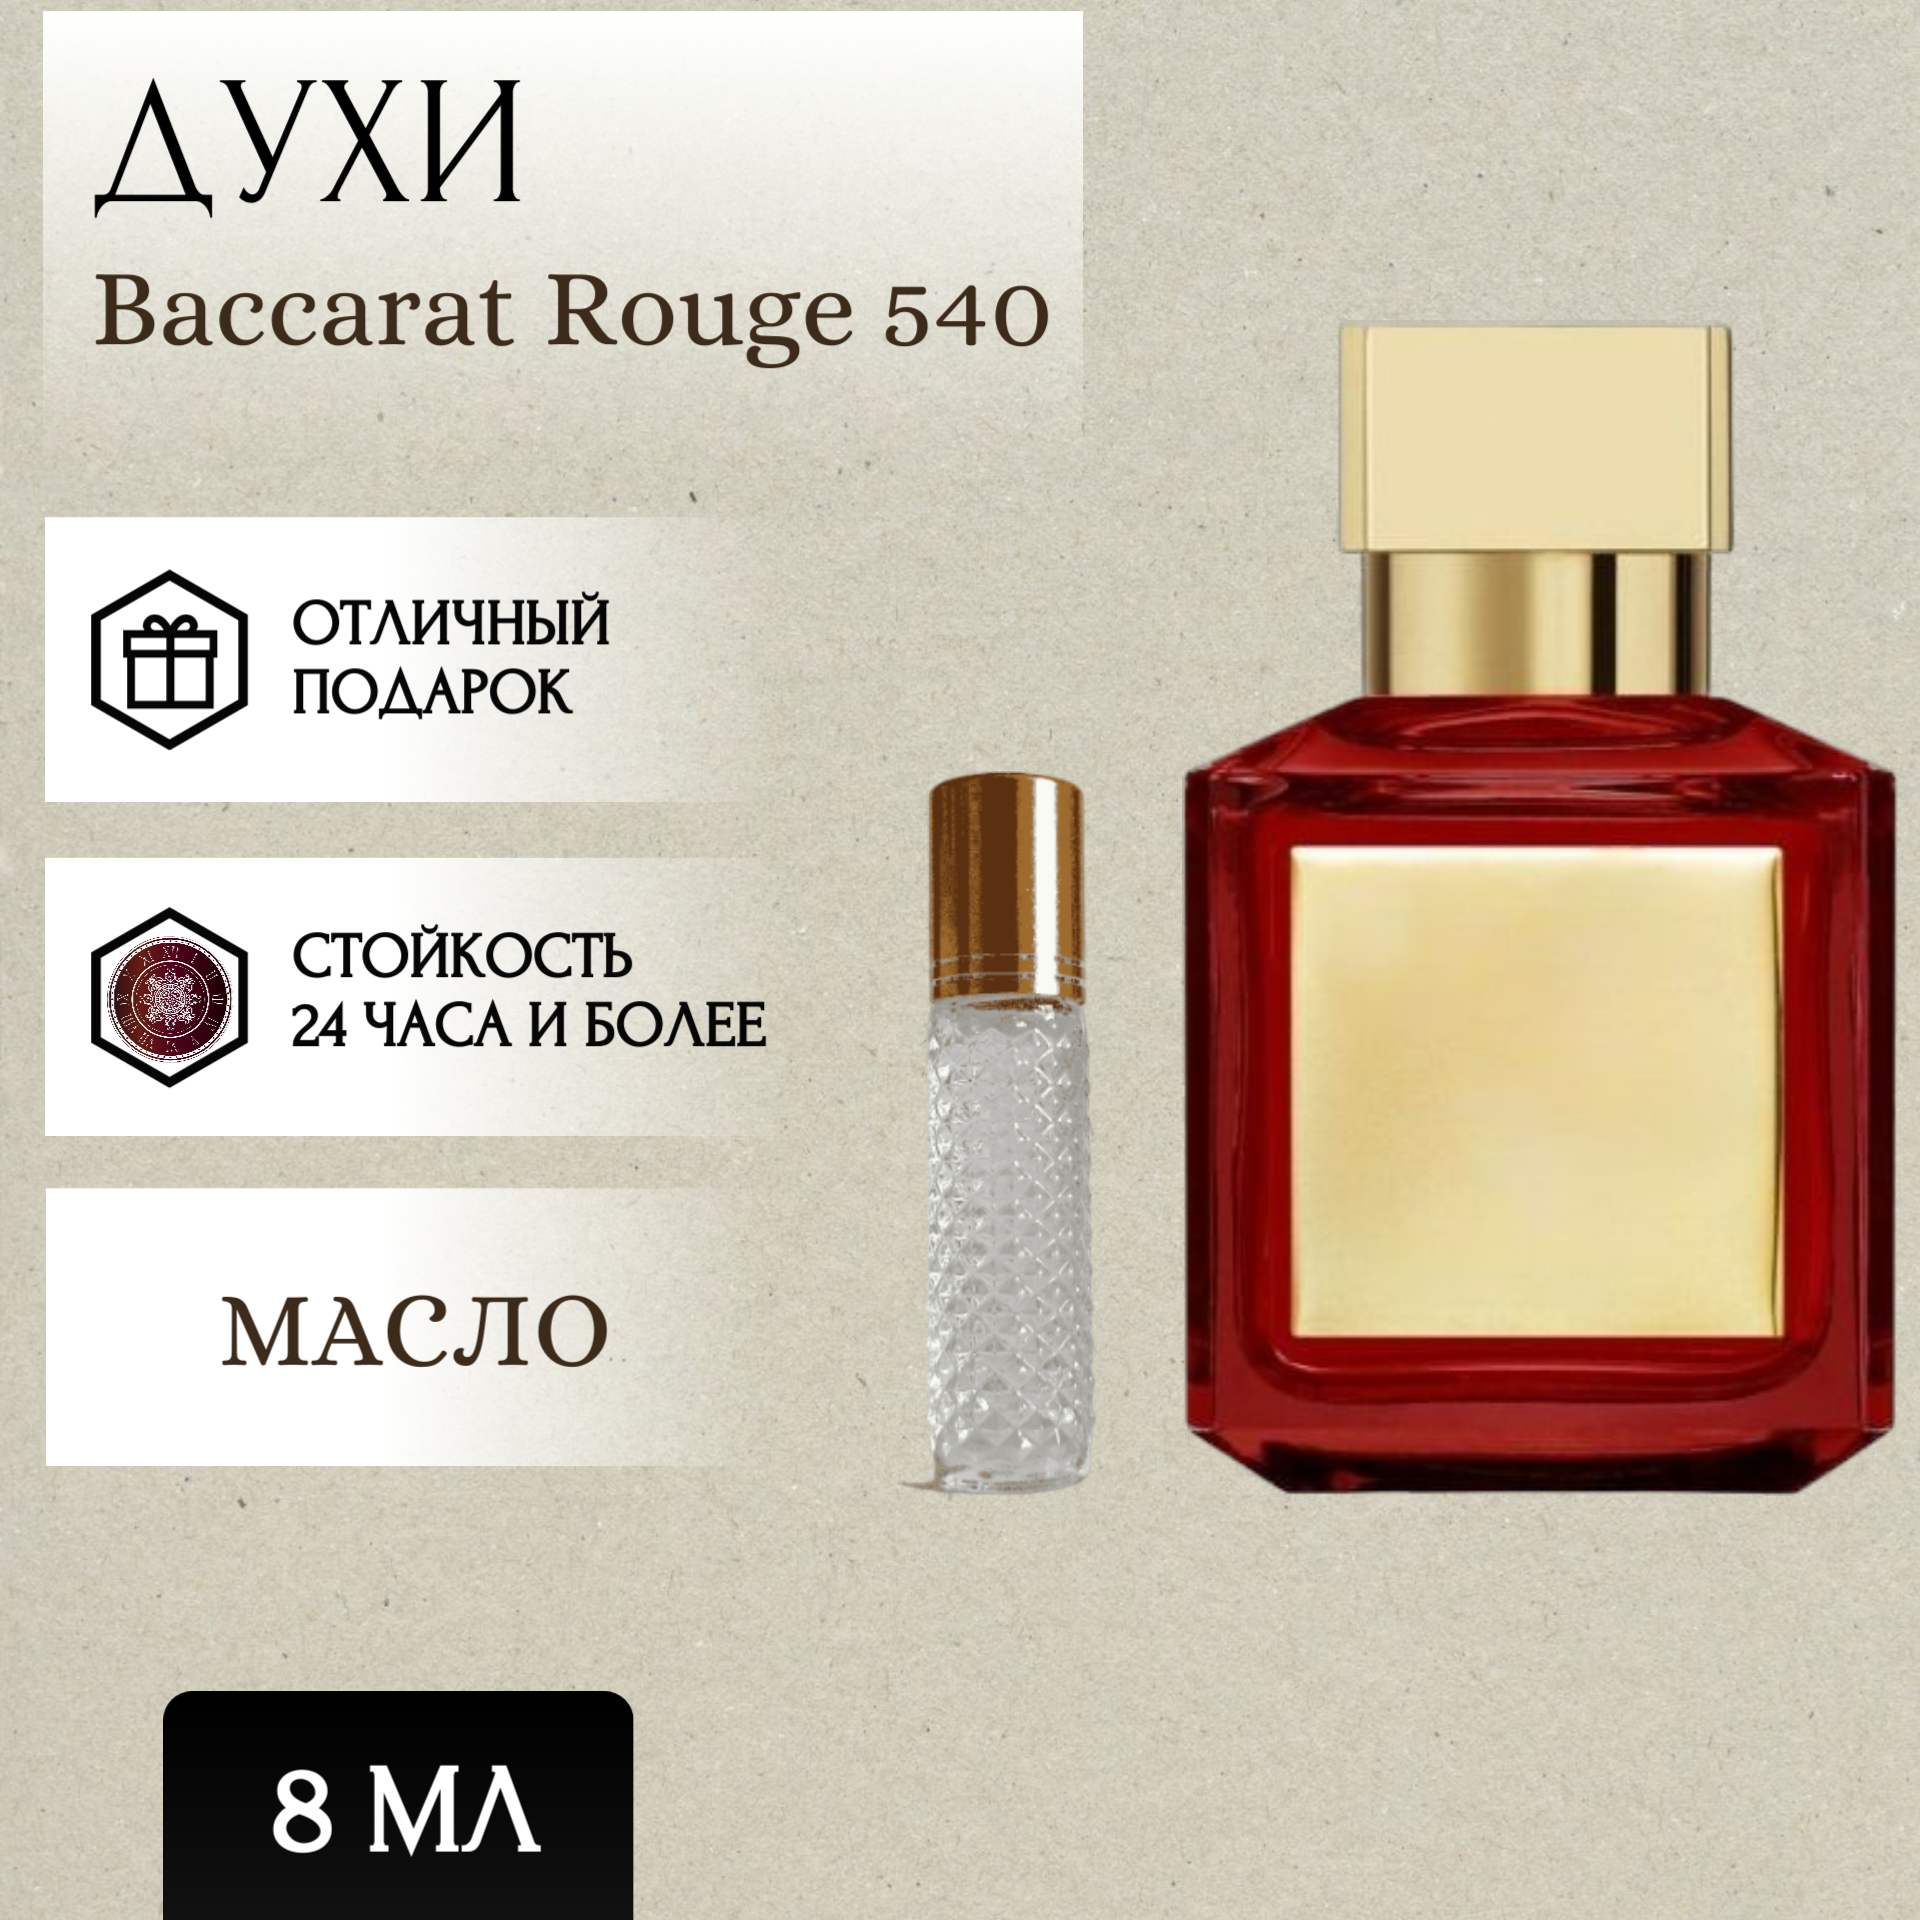 ParfumSoul; Духи масляные Baccarat Rouge 540; Баккара 540 роллер 8 мл